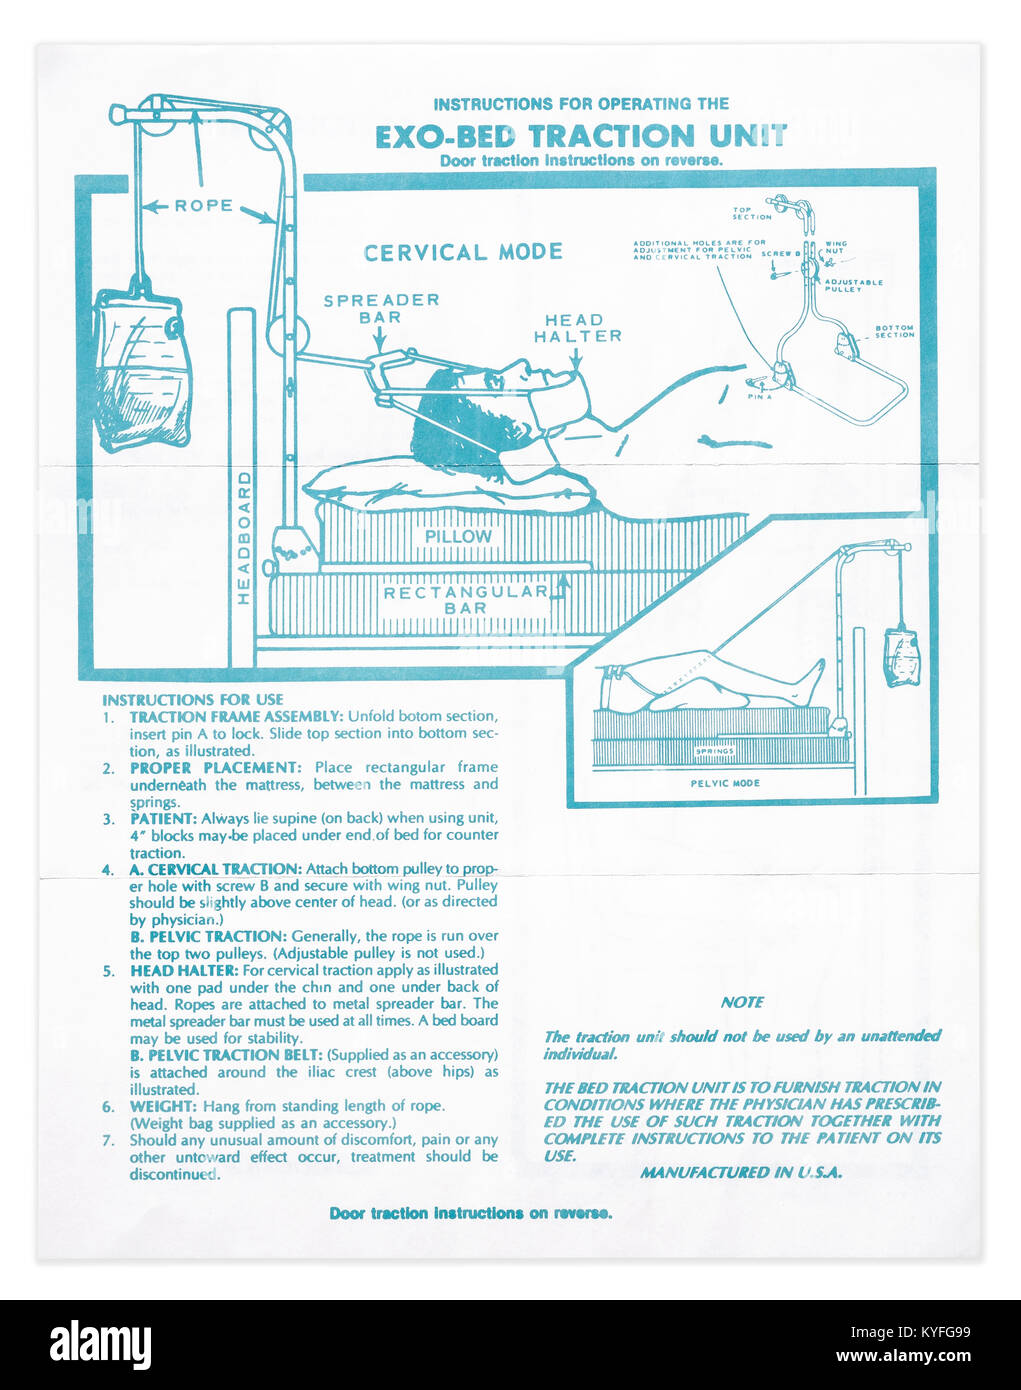 Vintage retro paper instructions for an exo bed traction unit Stock Photo